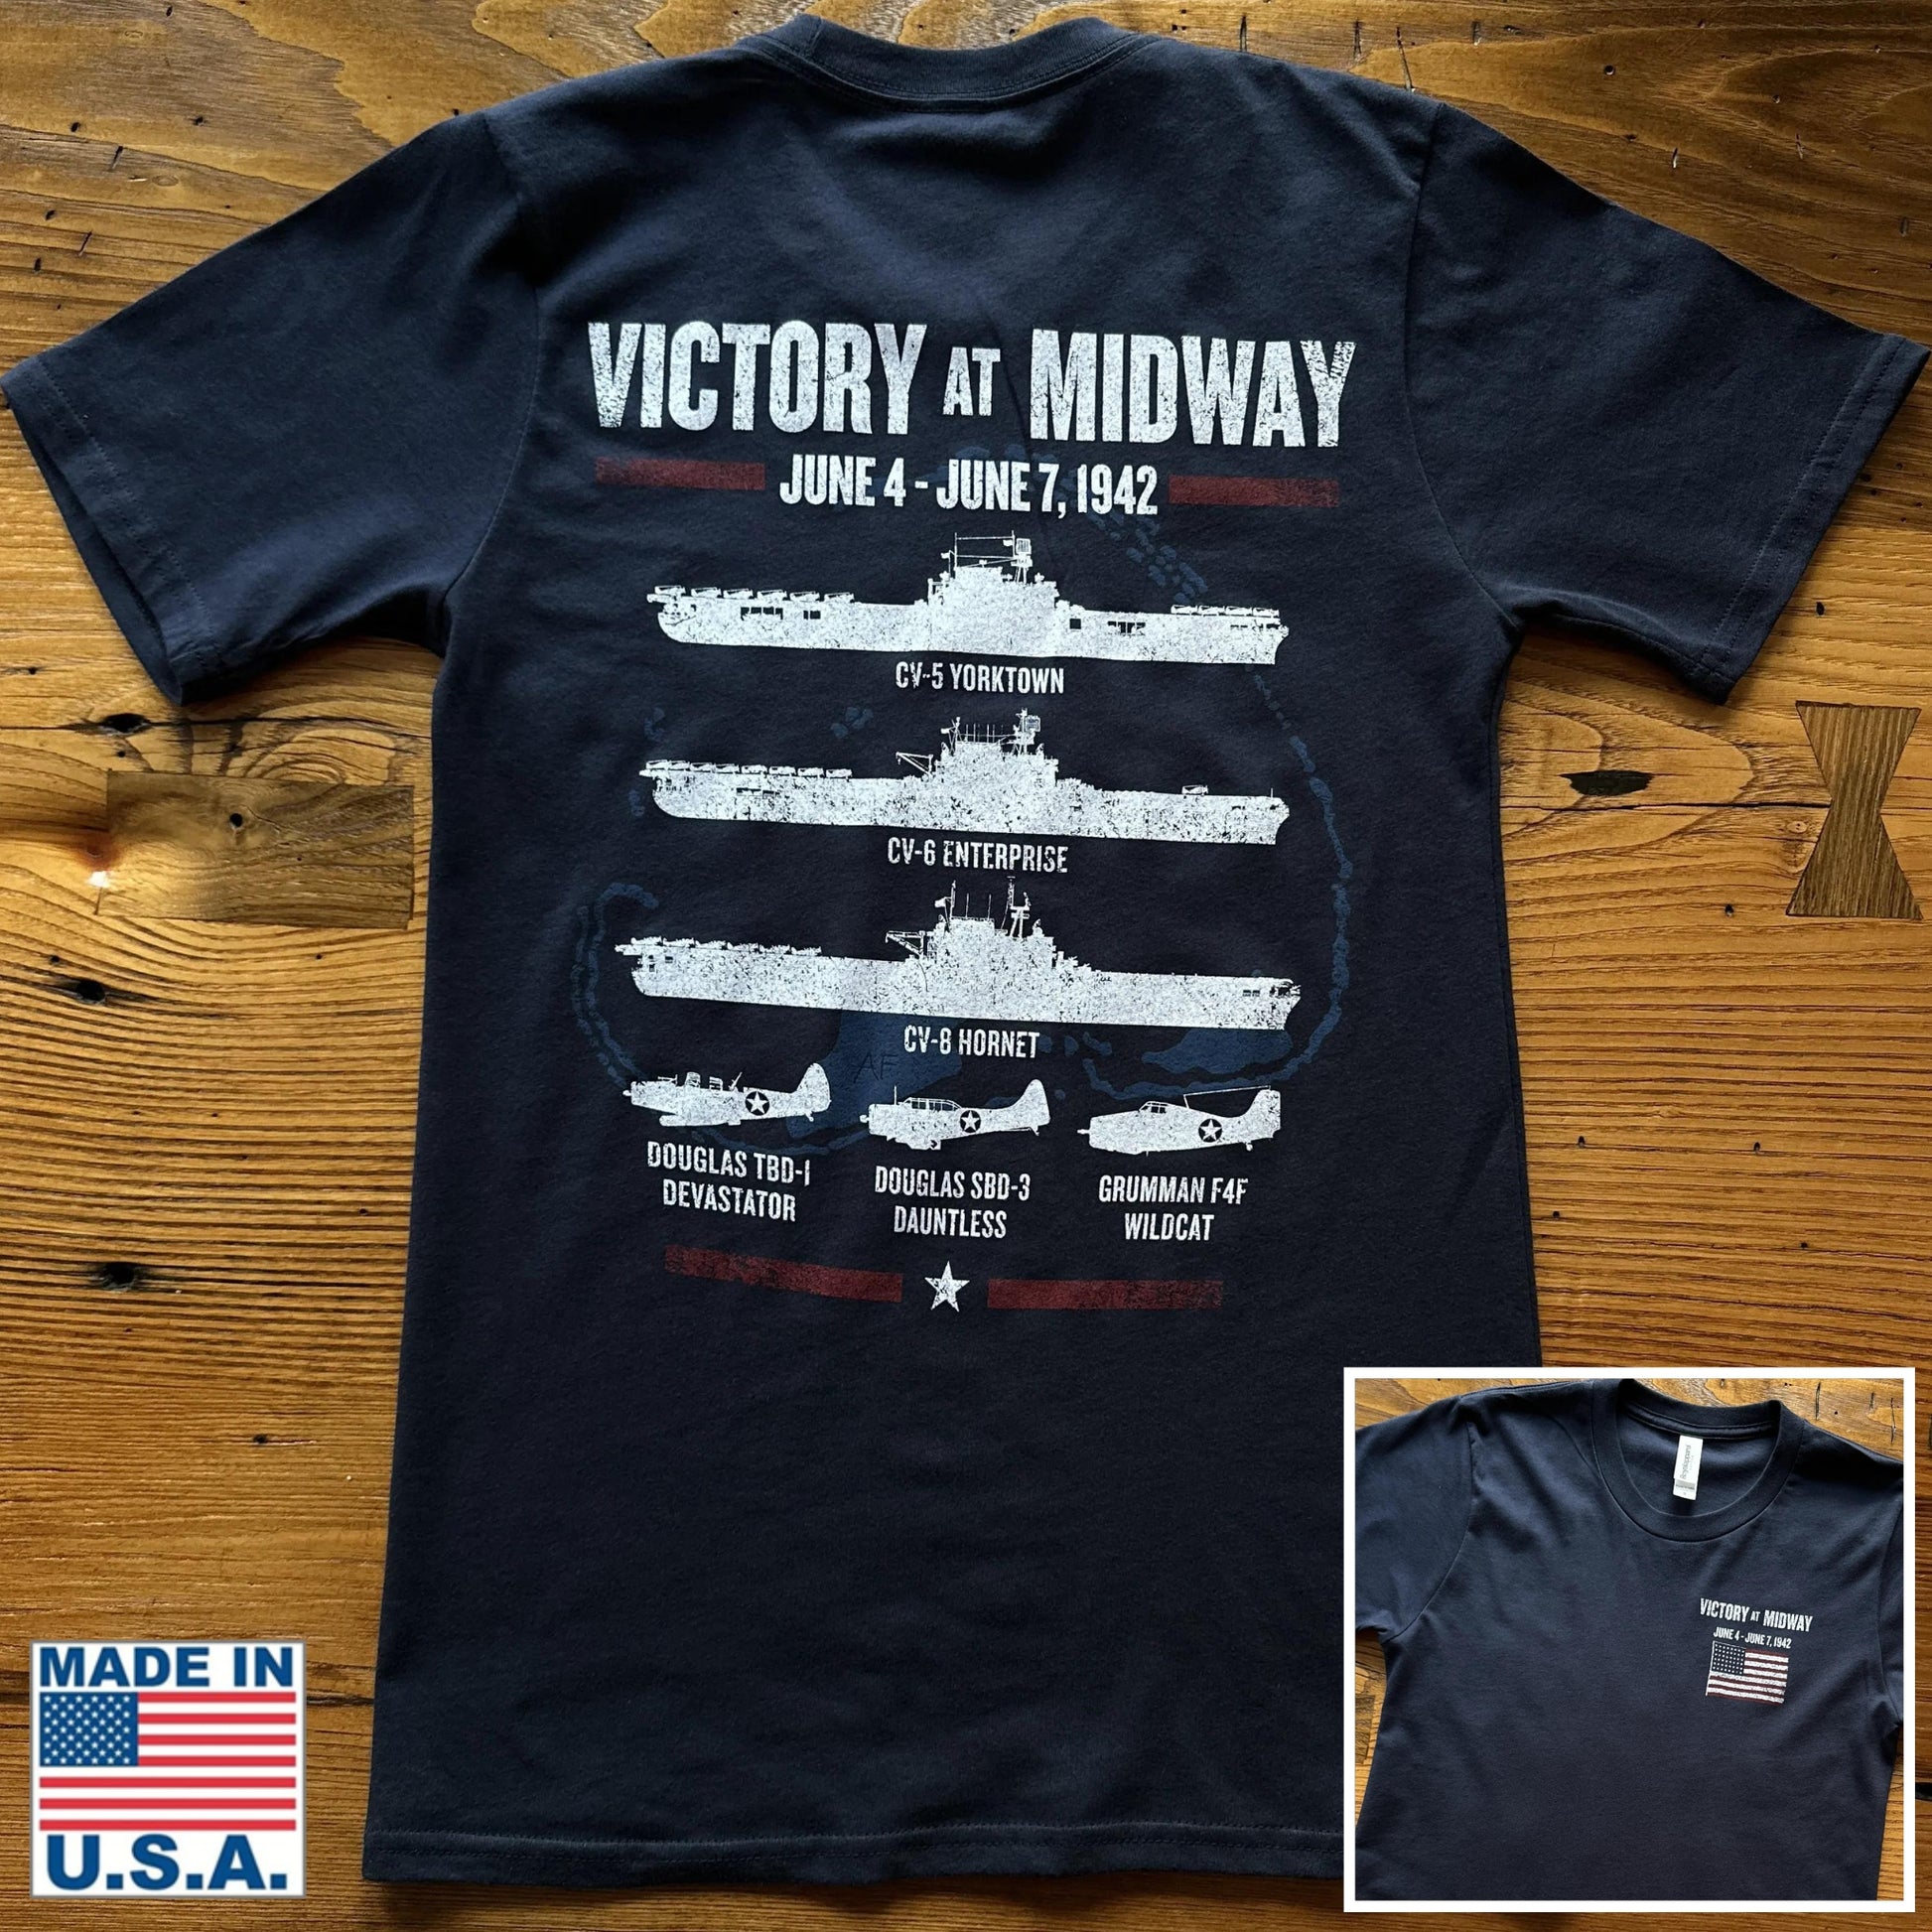 "Victory at Midway" Shirt from The History List store